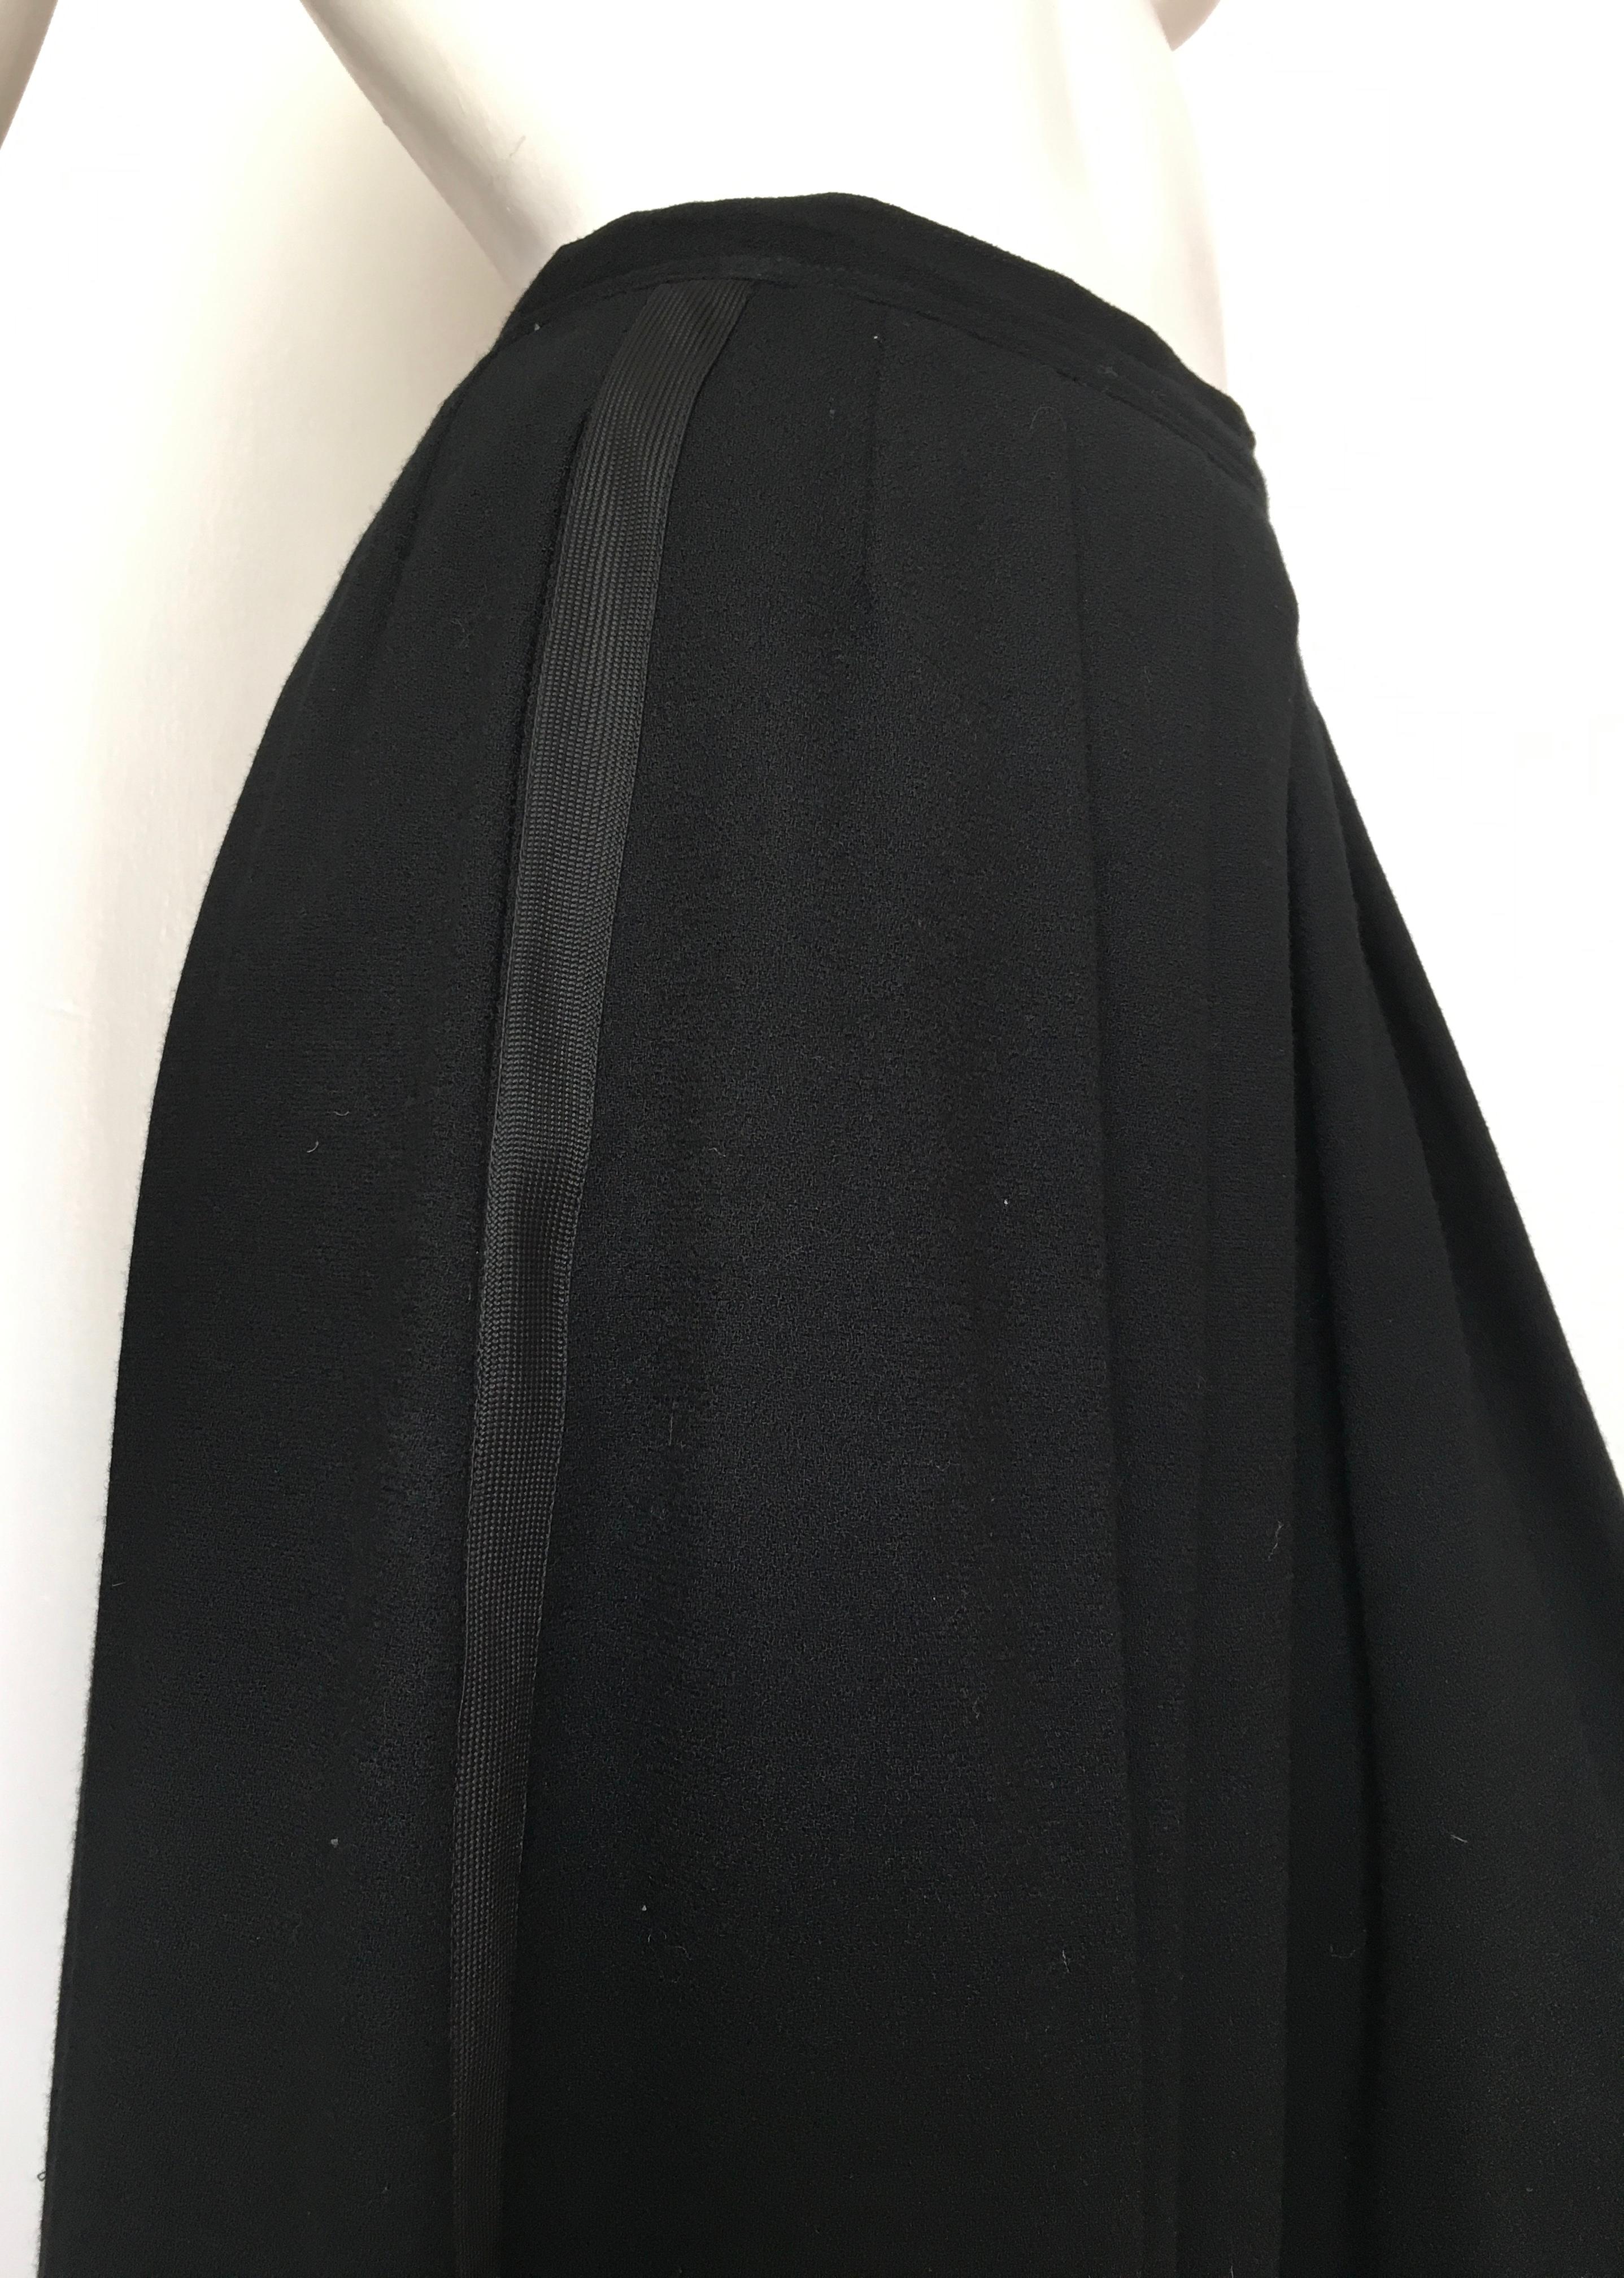 Richard Assatly 1970s Black Wool Pleated Culottes with Pockets Size 6. For Sale 1